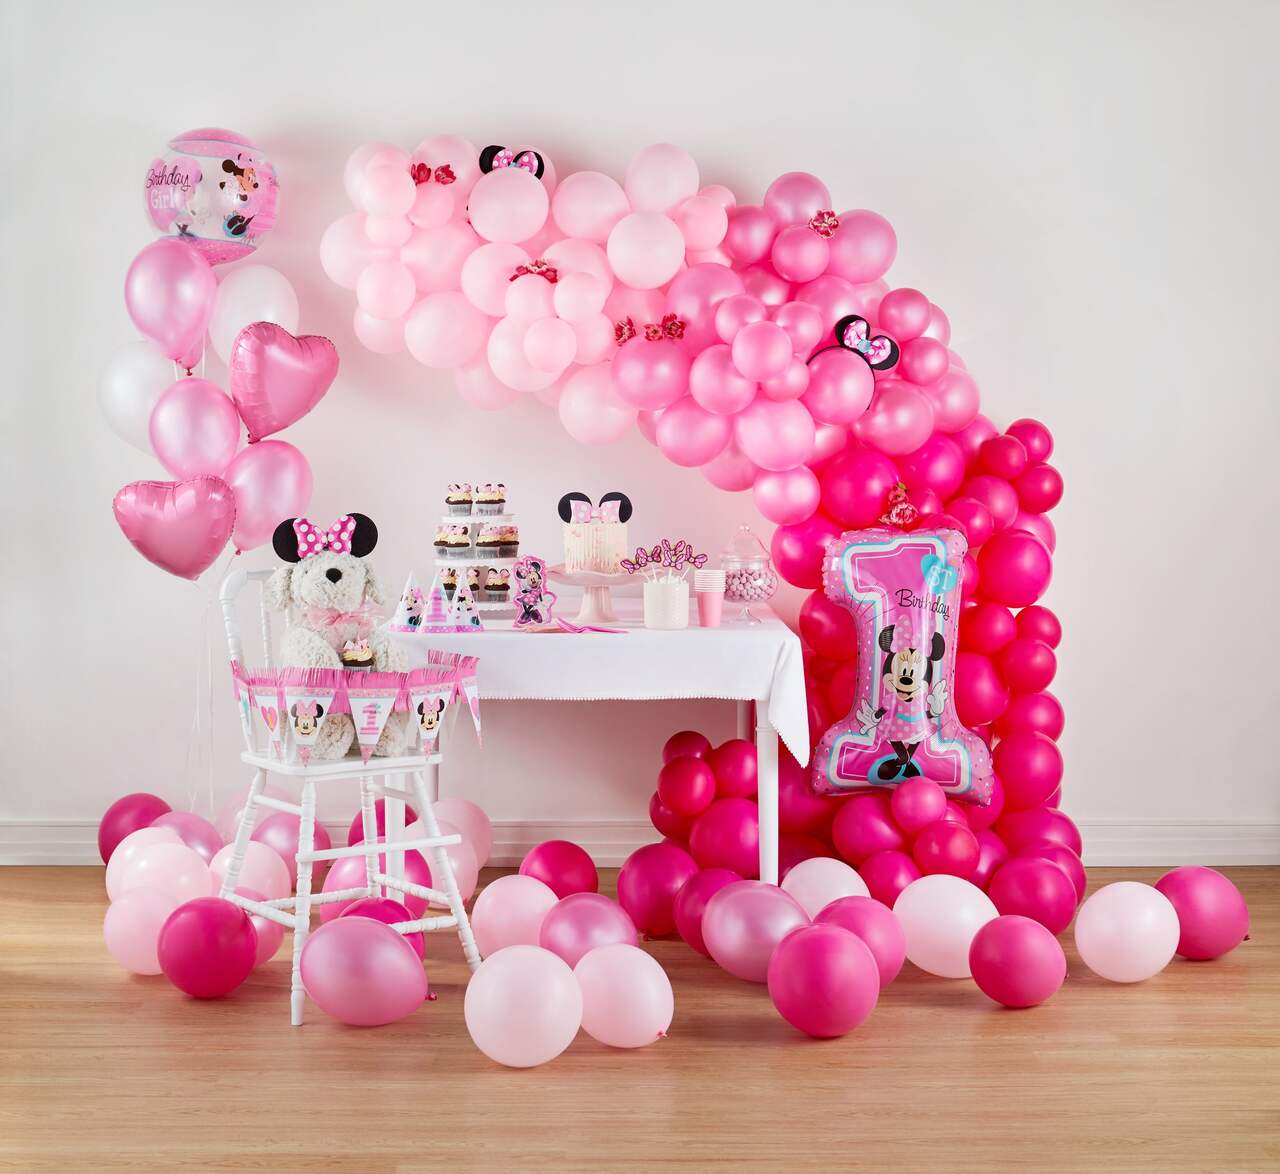 https://media-www.canadiantire.ca/product/seasonal-gardening/party-city-everyday/party-city-party-supplies-decor/8431467/giant-1st-birthday-minnie-mouse-balloon-ffd692f8-30ef-4967-a6c6-bc28510781c7-jpgrendition.jpg?imdensity=1&imwidth=1244&impolicy=mZoom